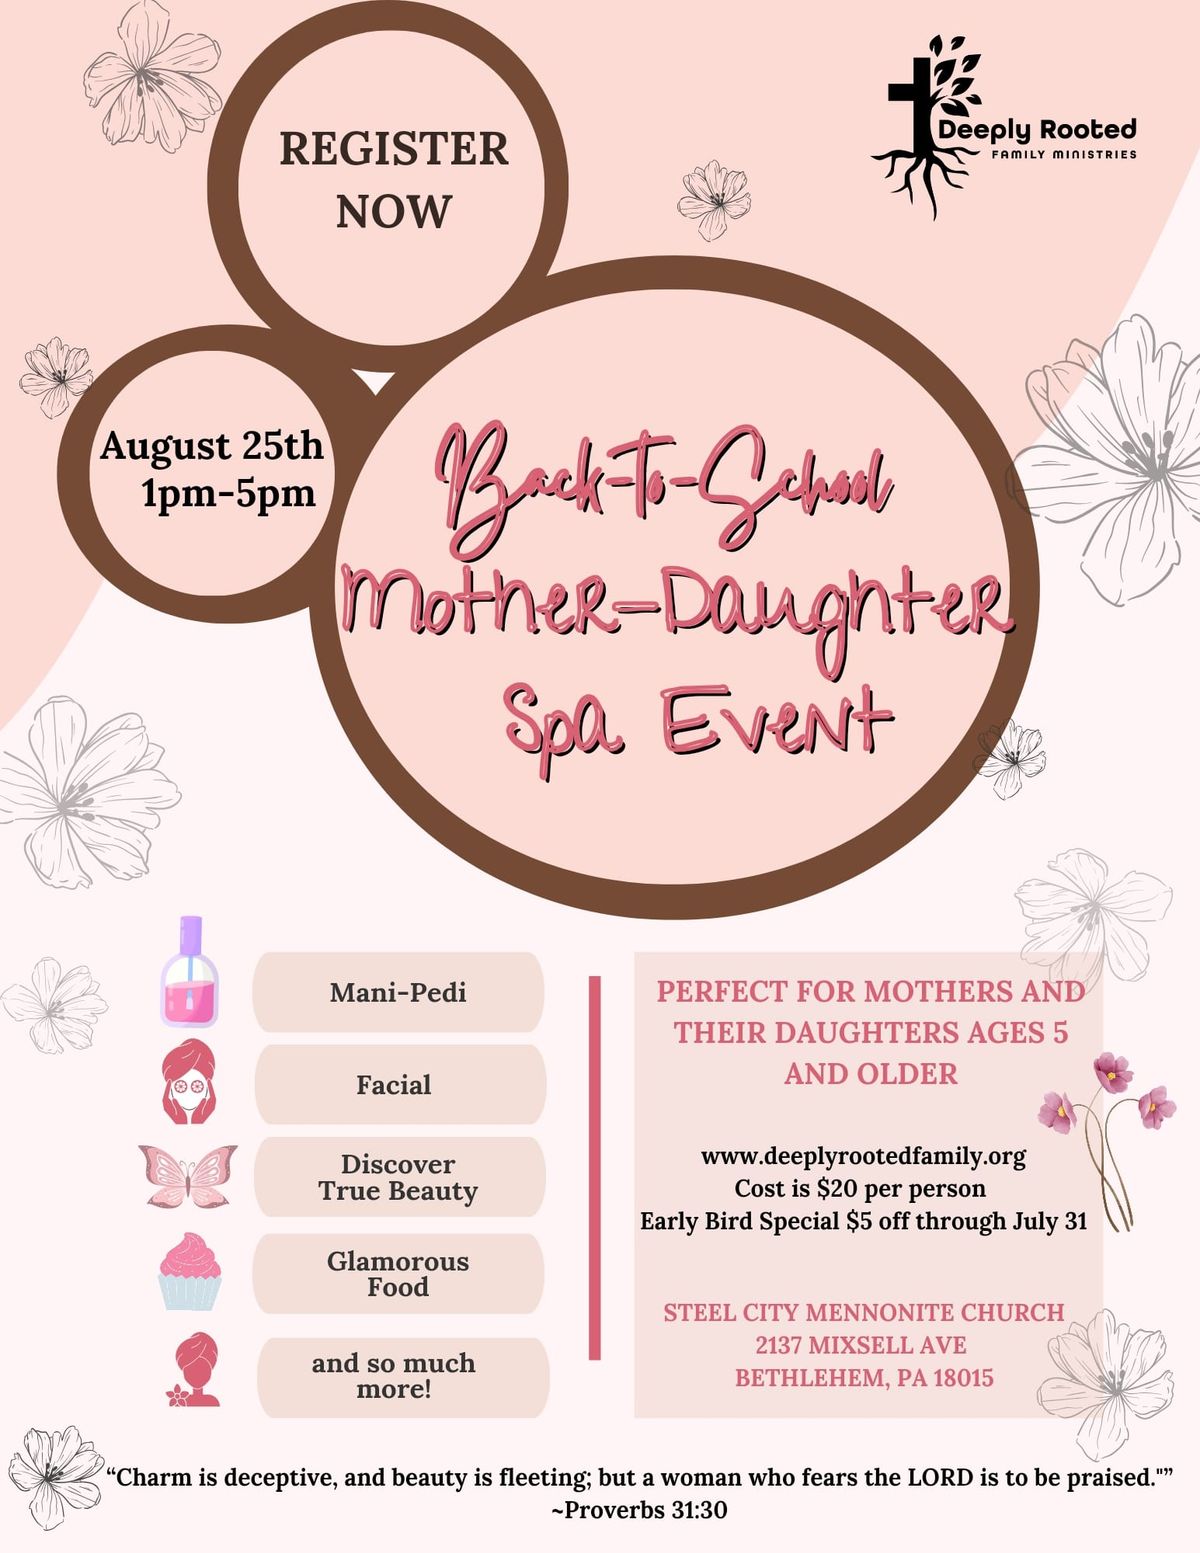 Back to School Mother-Daughter Spa Event